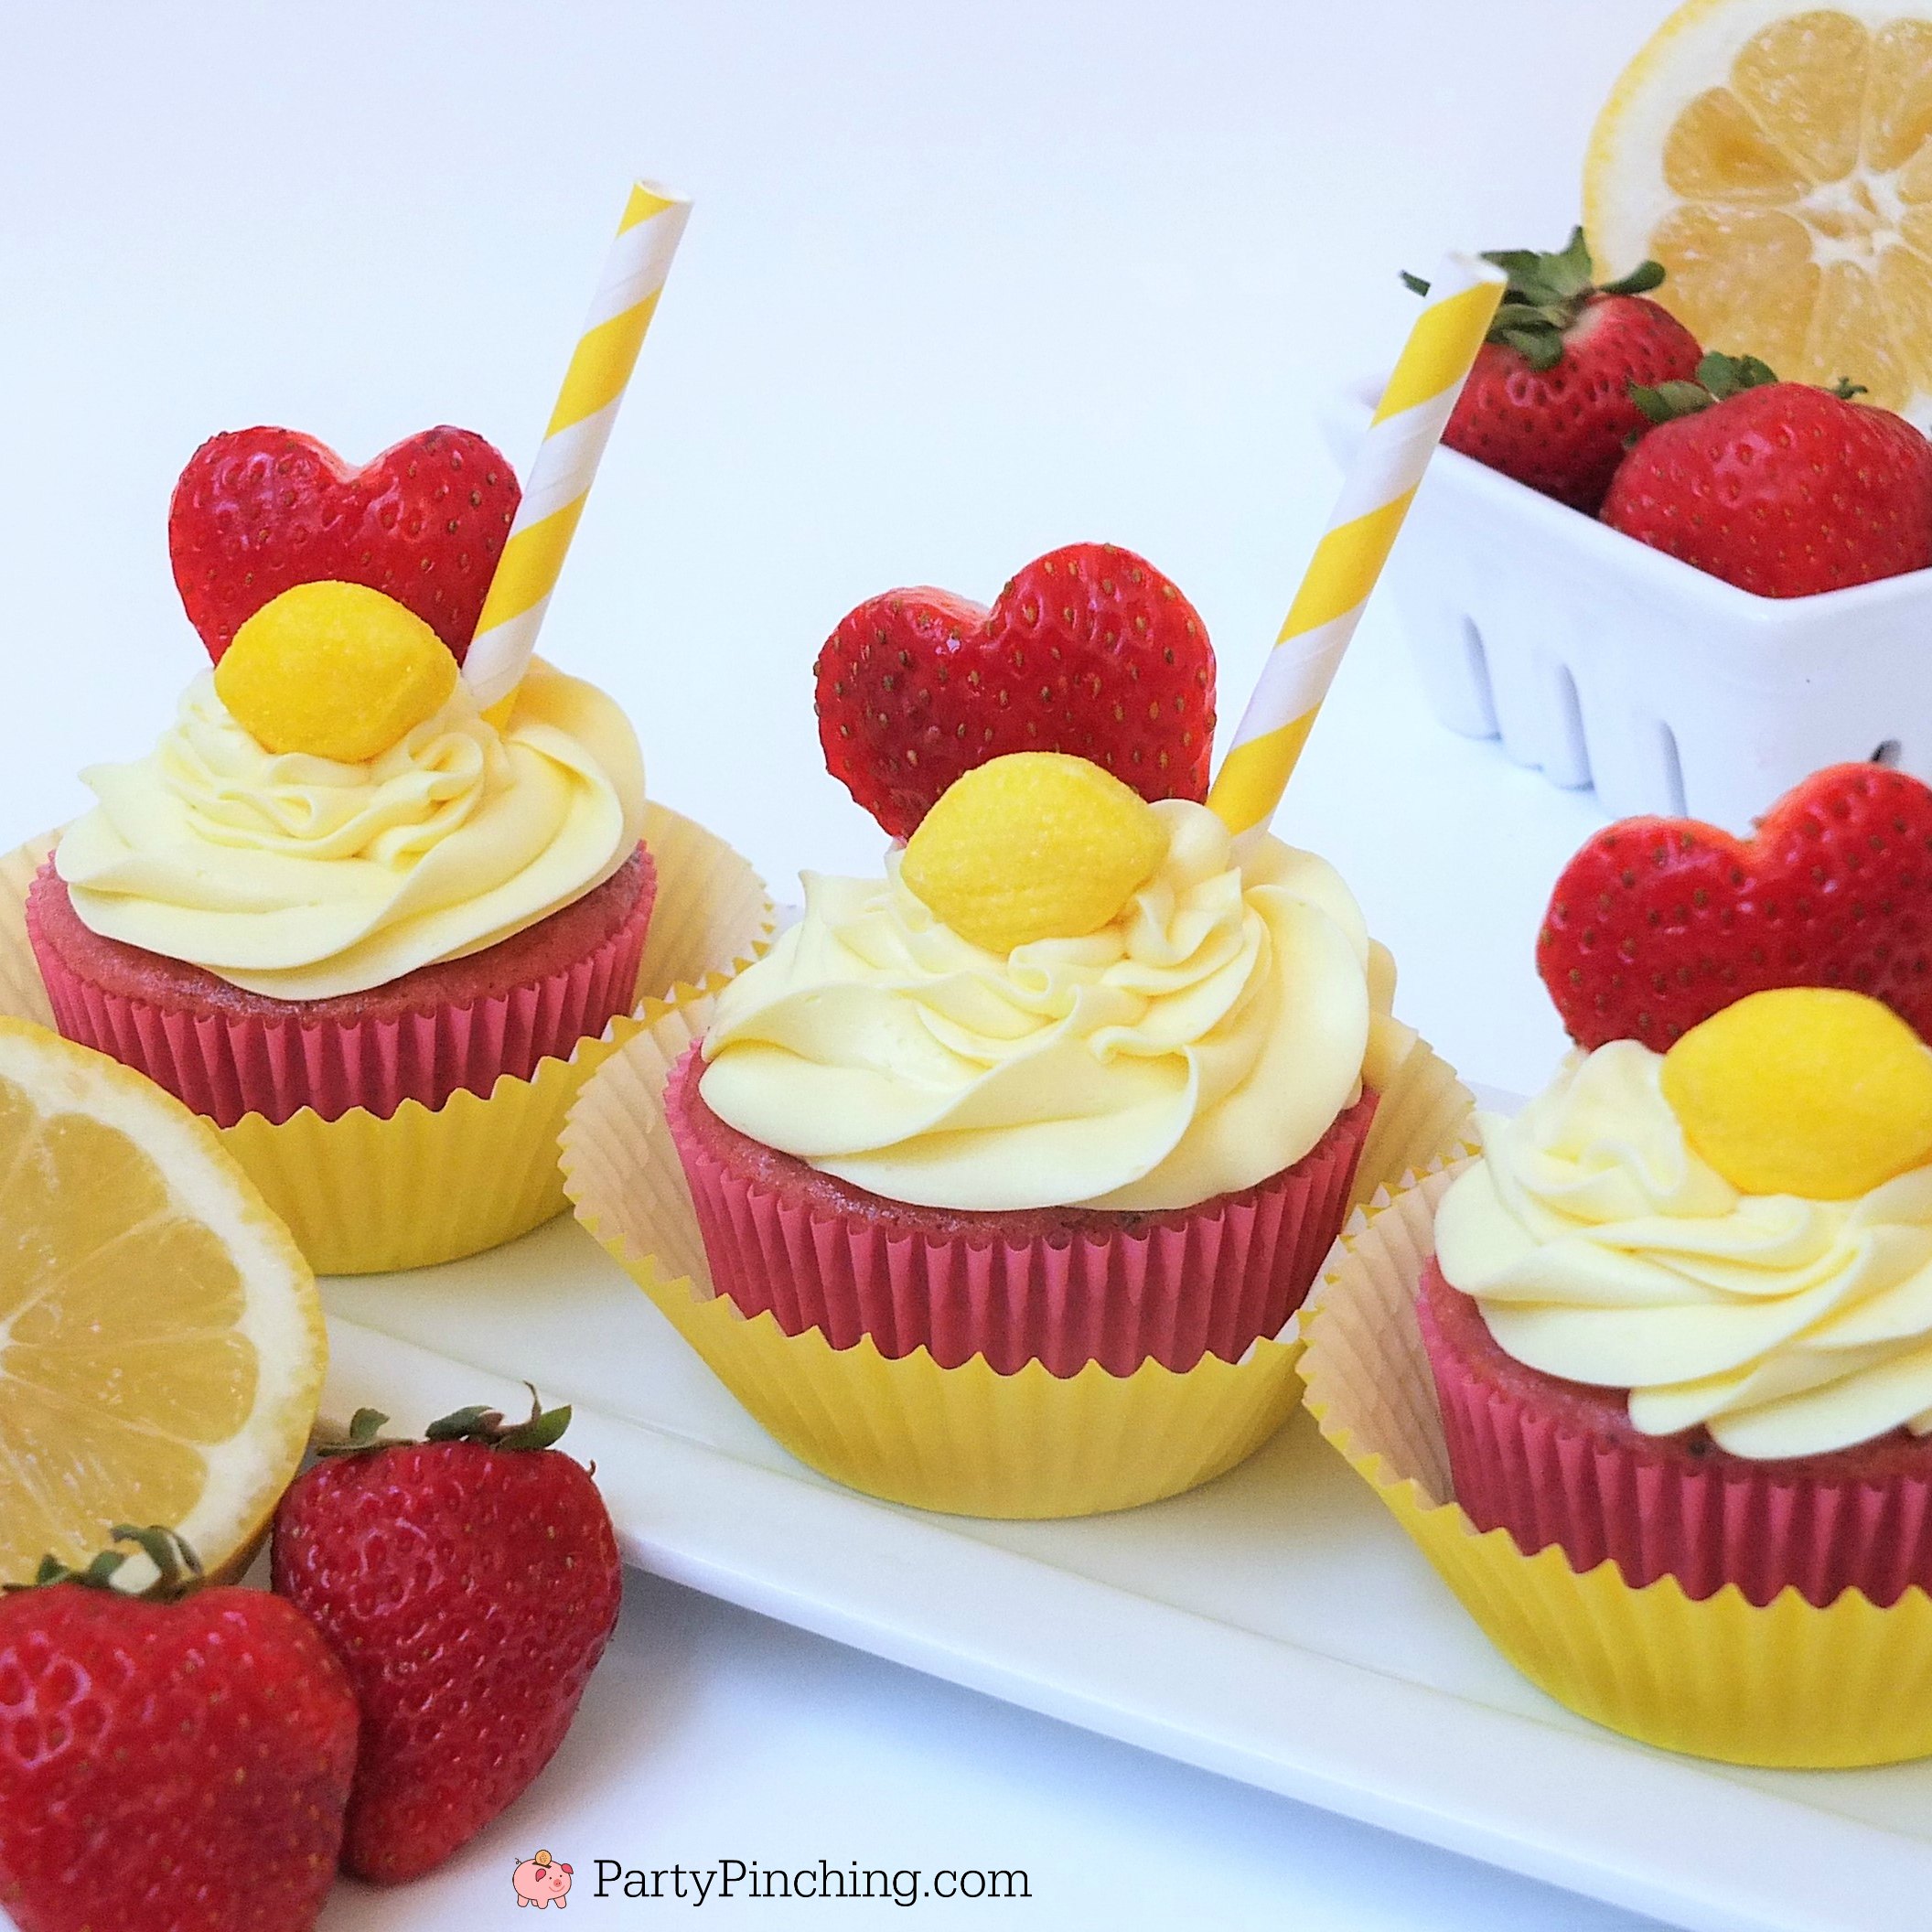 strawberry lemonade cupcakes, box mix fresh fruit cupcakes, refreshing summer cupcakes, cute cupcakes for kids, fun and easy cupcakes, strawberry cupcakes with frozen puree, lemon can frosting with zest and juice, easy cupcake recipe